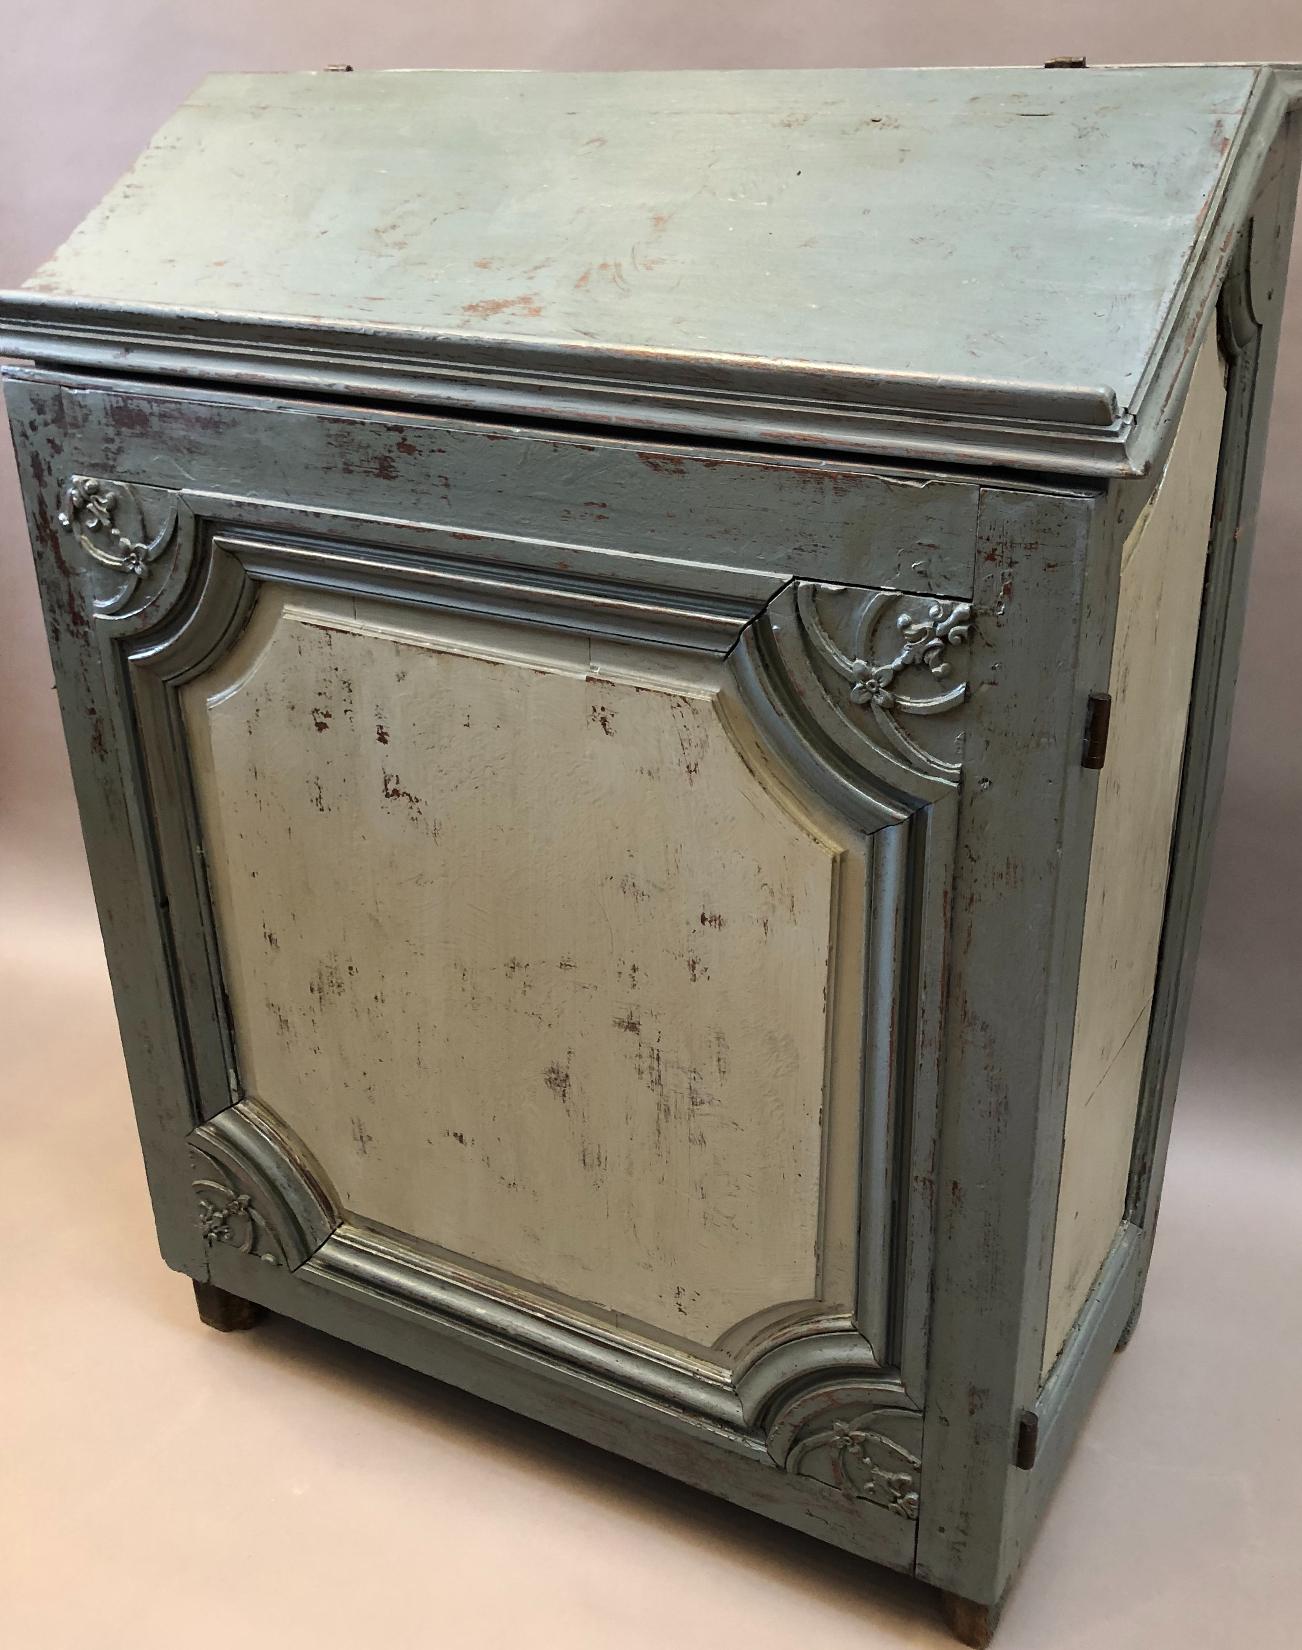 Early 18th century French provincial single door cabinet. Made predominantly of walnut and chestnut with an old blue gray painted finish. Good proportions with a single carved and paneled door below a sloped hinged book rest. Made near Poitiers